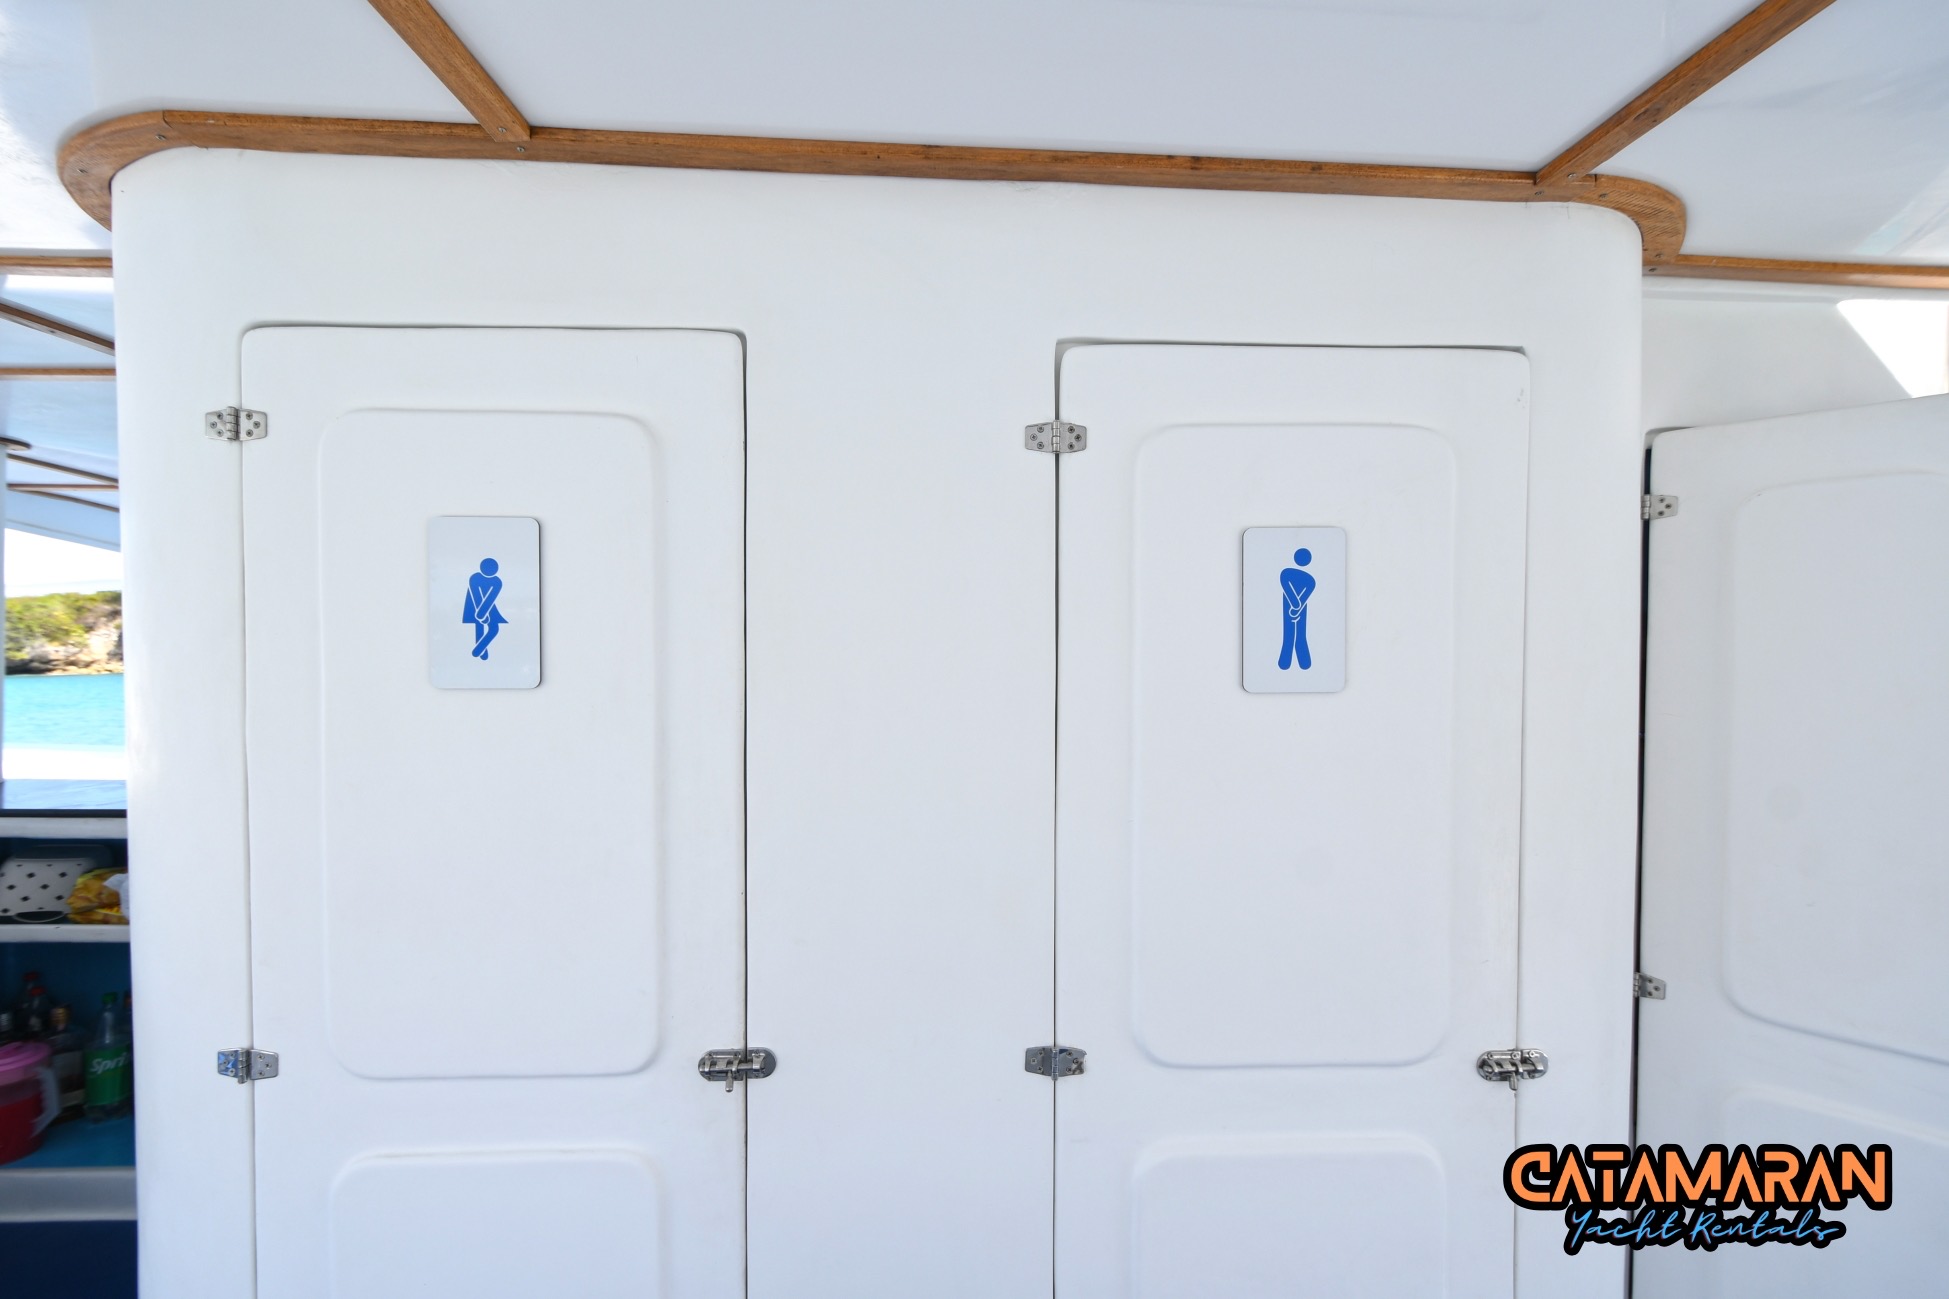 His and Hers bathrooms